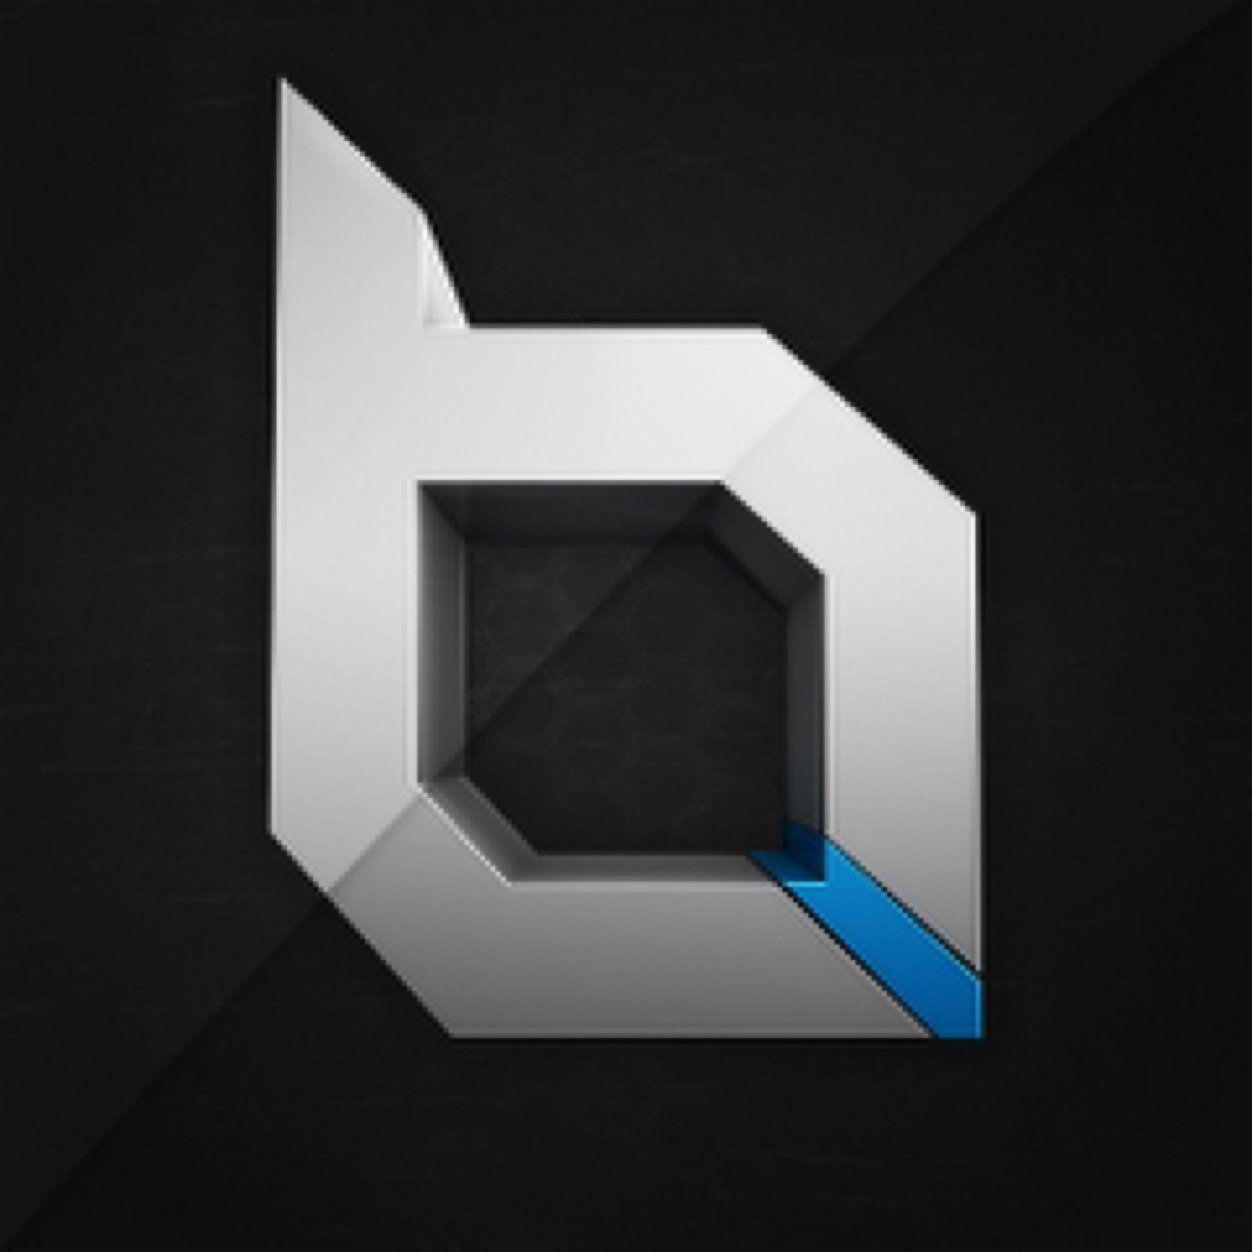 Obey Alliance Logo search for picture